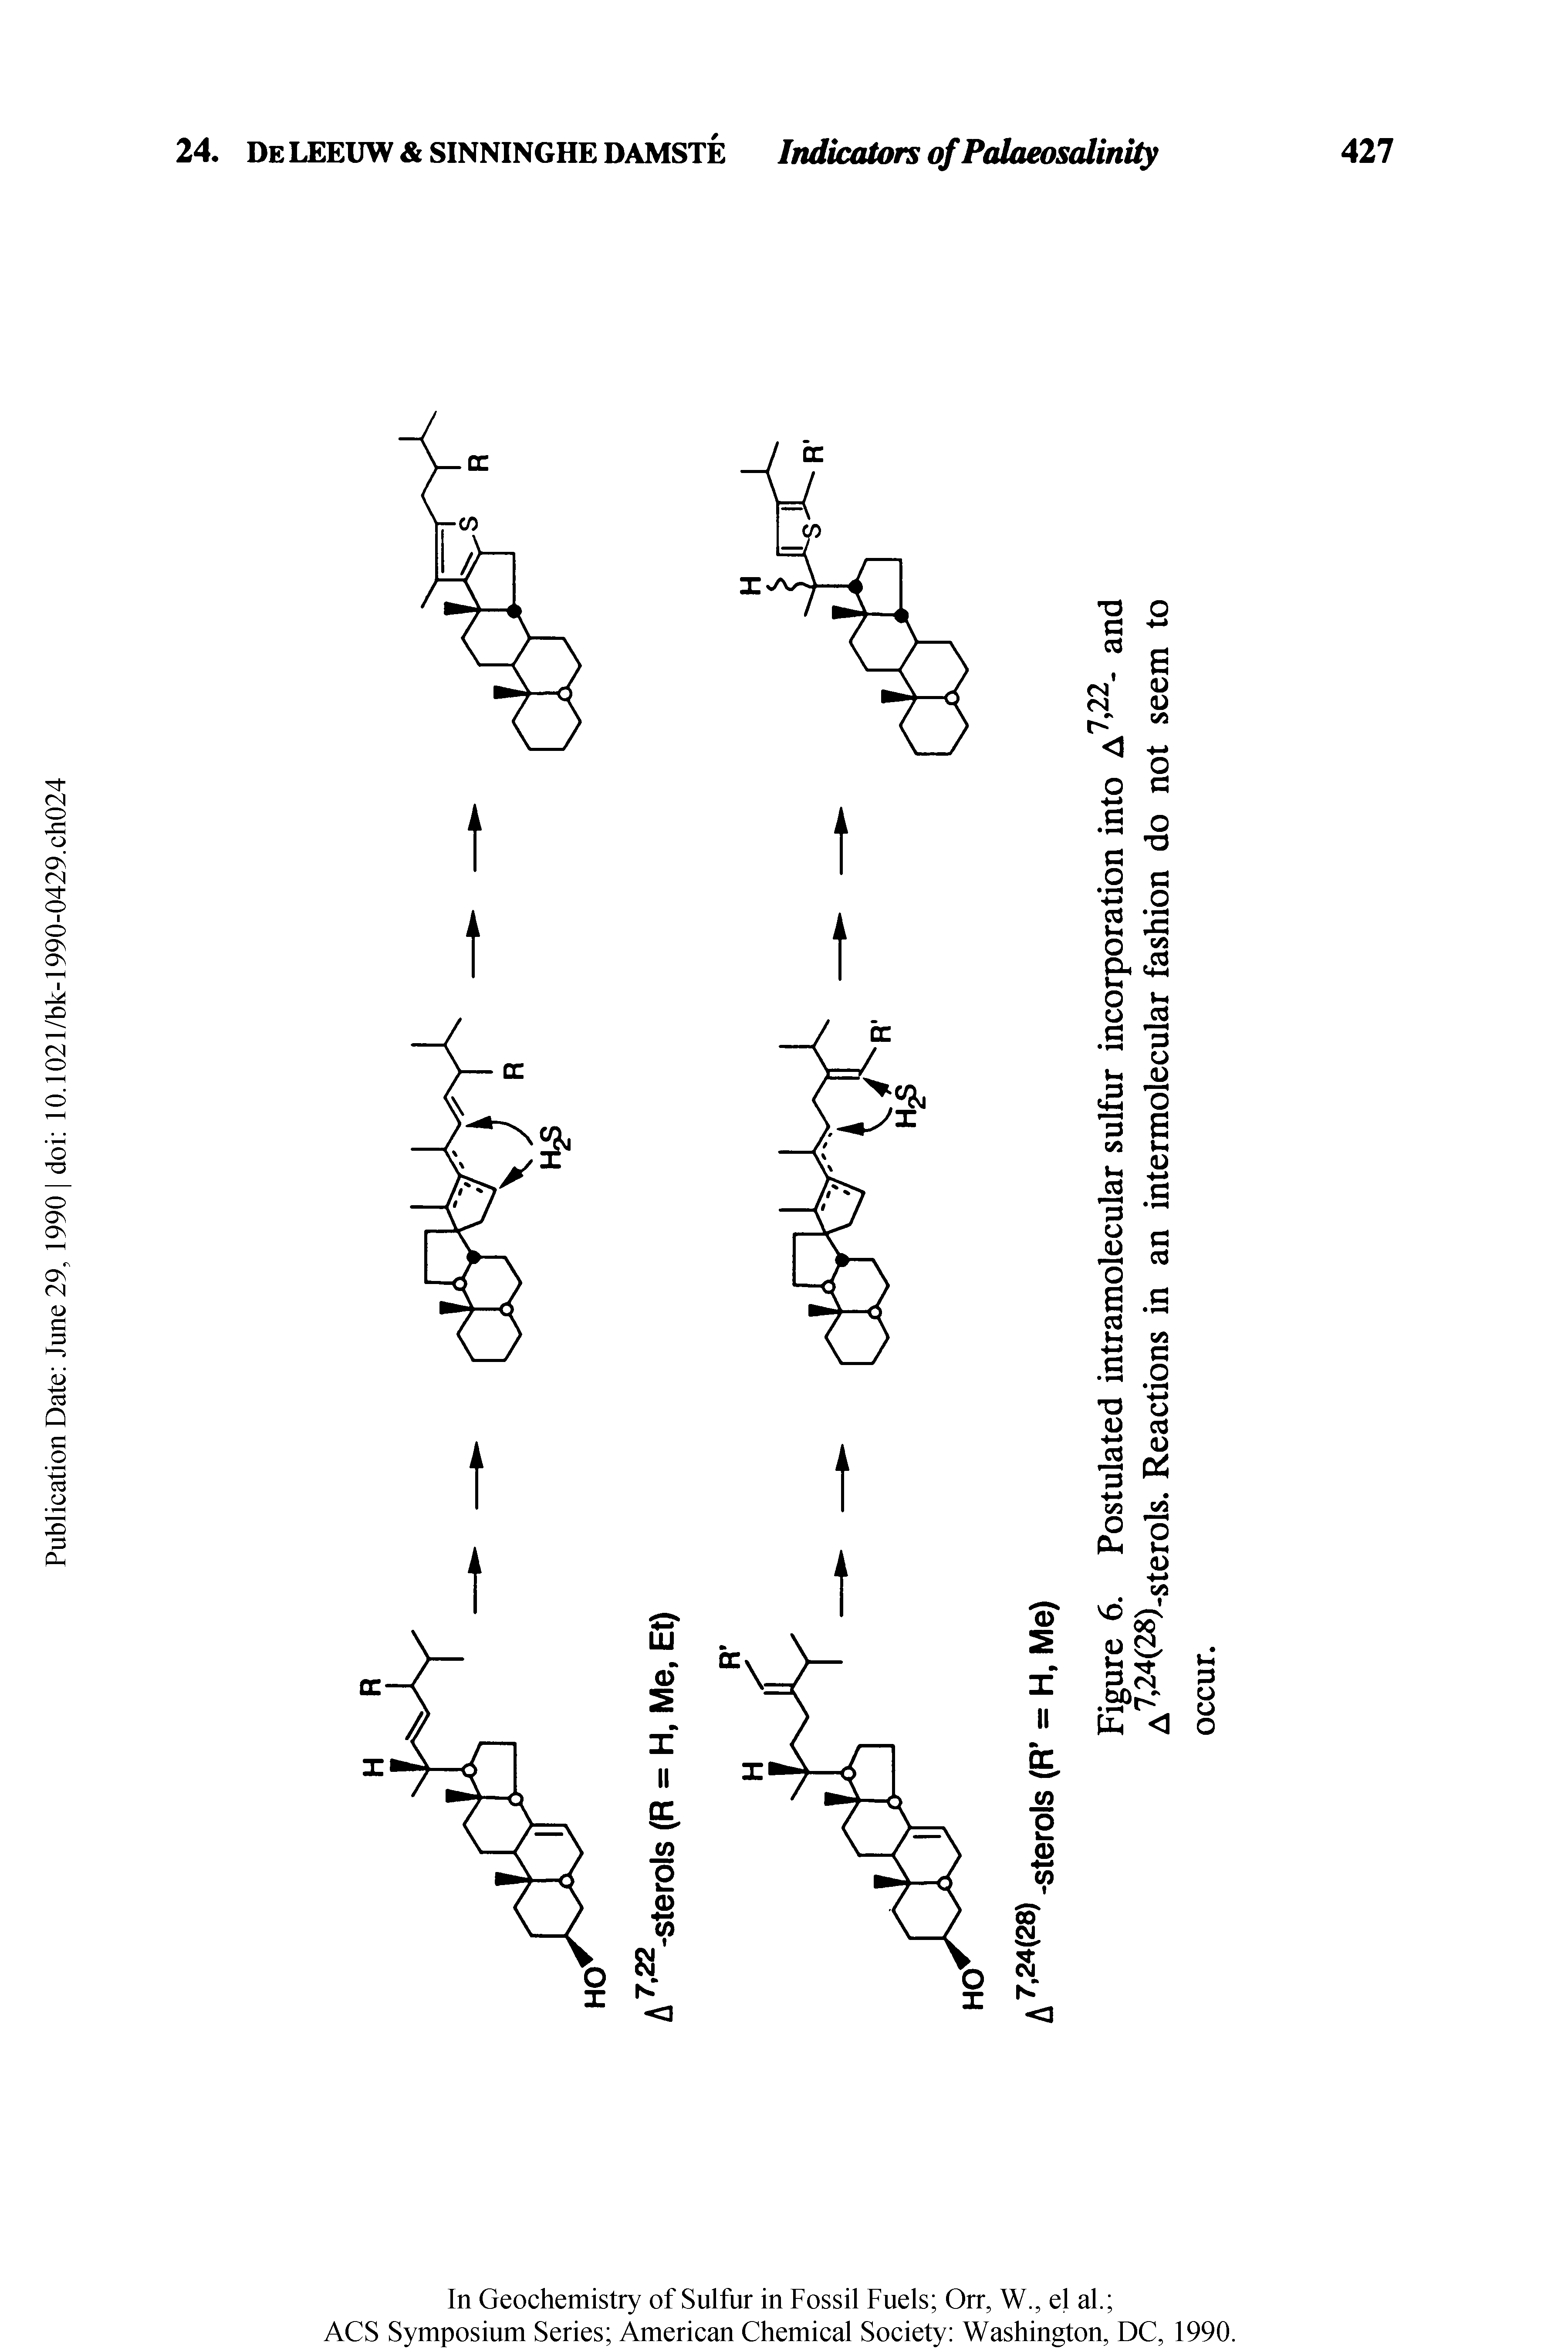 Figure 6. Postulated intramolecular sulfur incorporation into A7,22- and A7,24(28)-sterols. Reactions in an intermolecular fashion do not seem to...